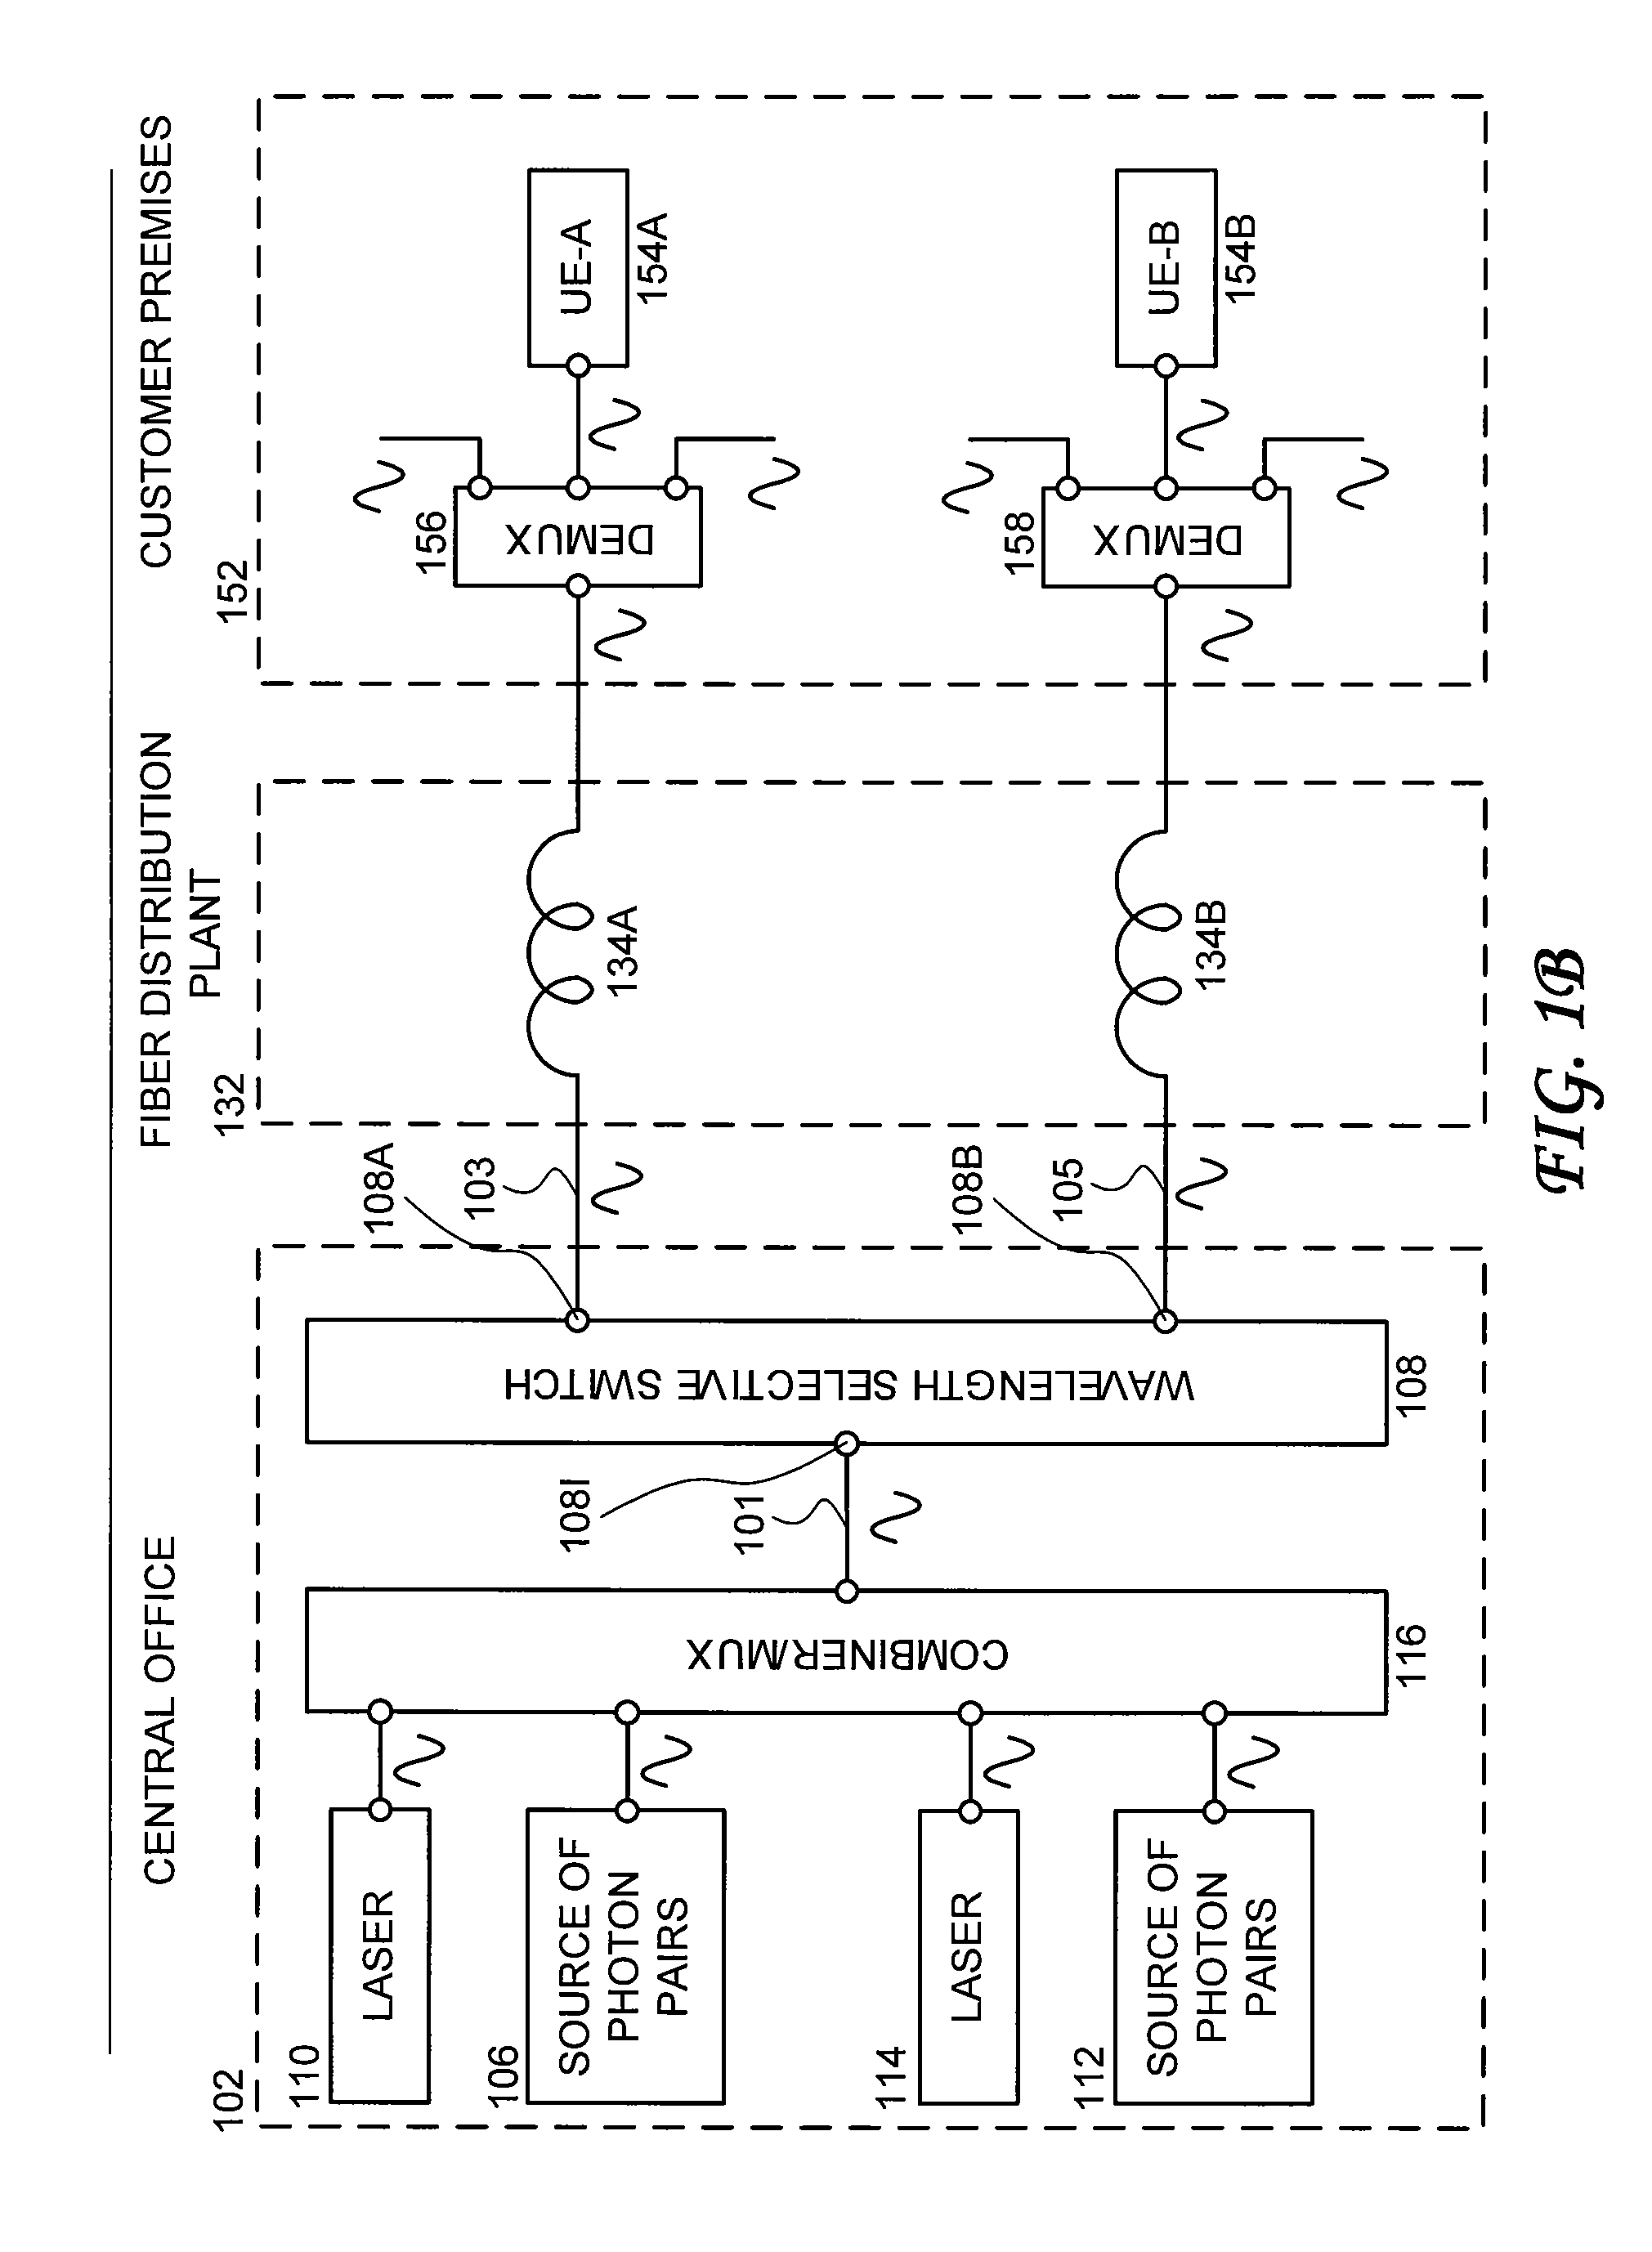 Bandwidth provisioning for an entangled photon system